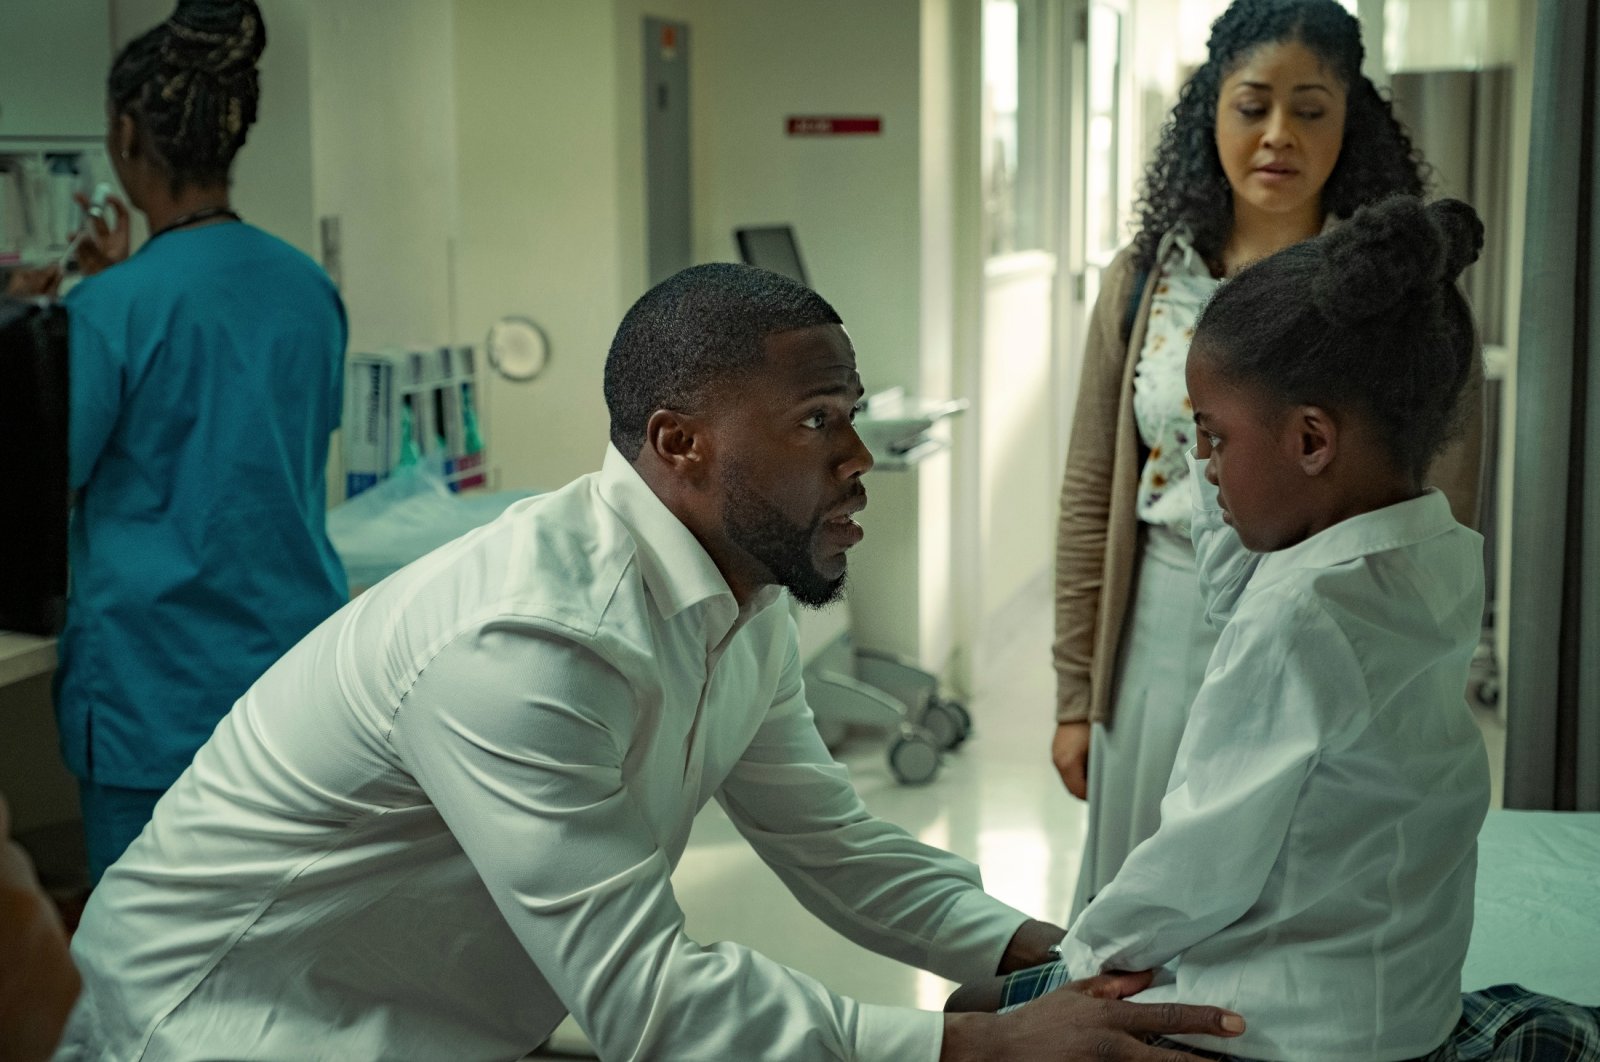 Kevin Hart (L) and Melody Hurd (R) at a hospital in a scene from the movie "Fatherhood." (Netflix via AP)